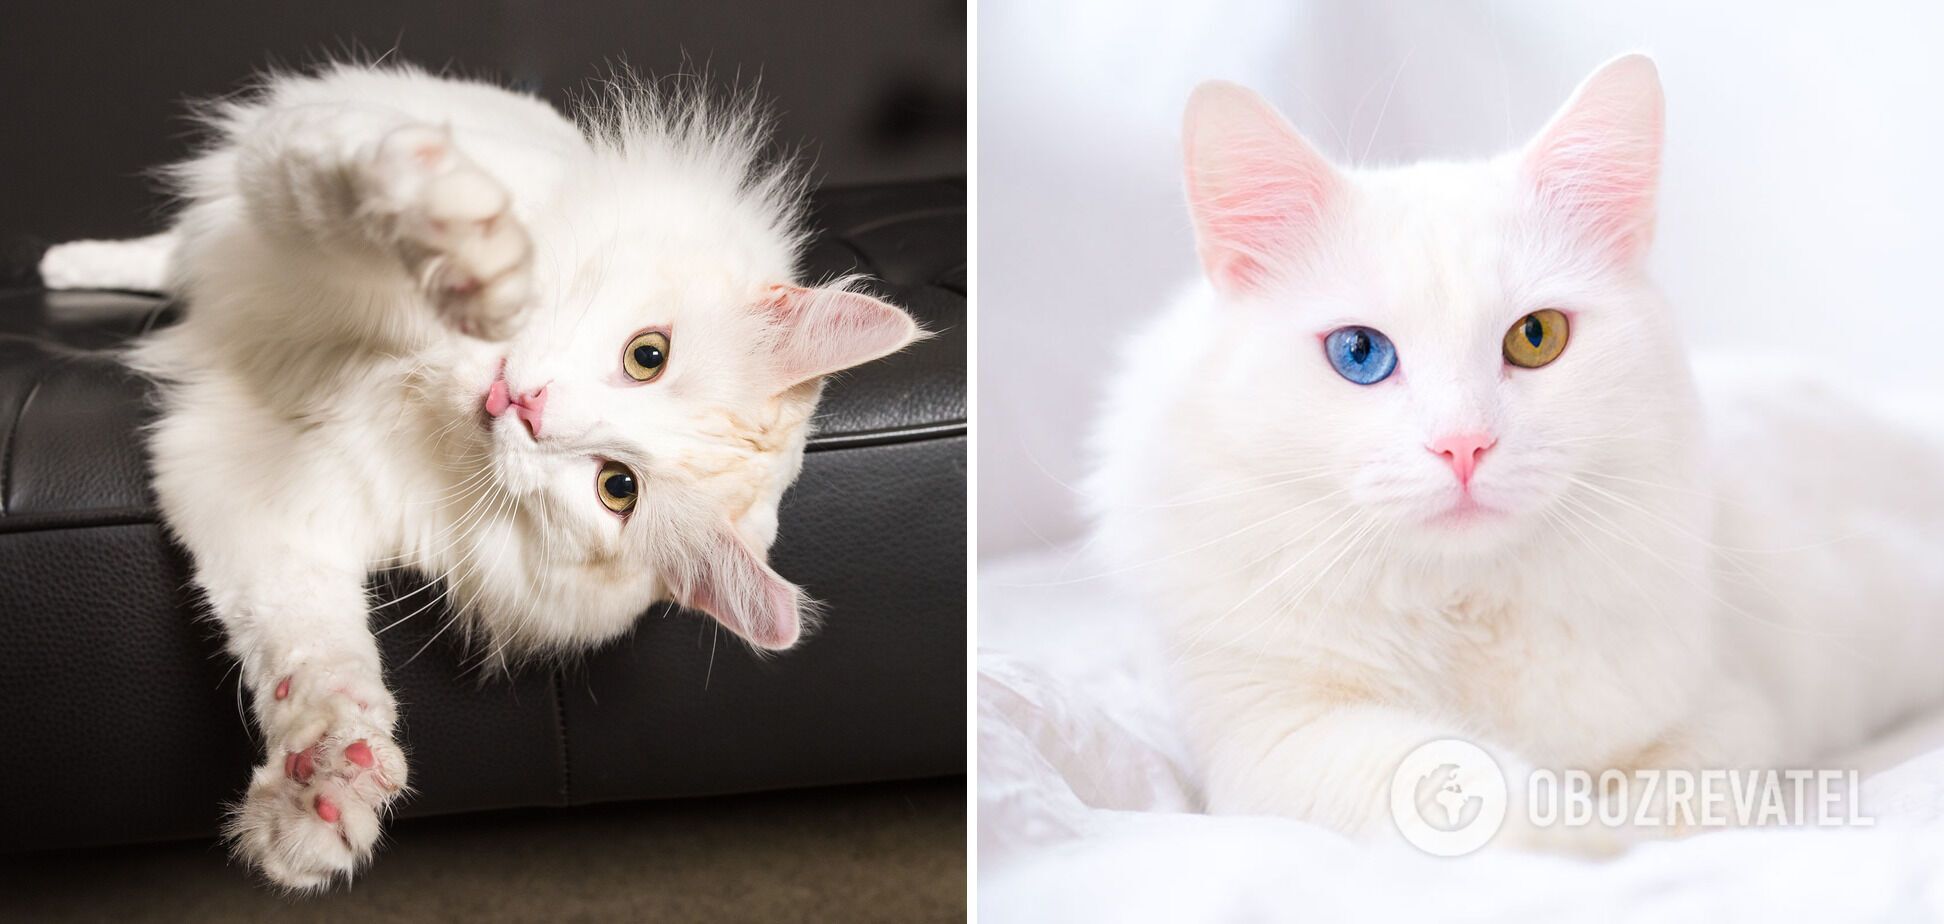 Delightful: which cat breeds are the most beautiful